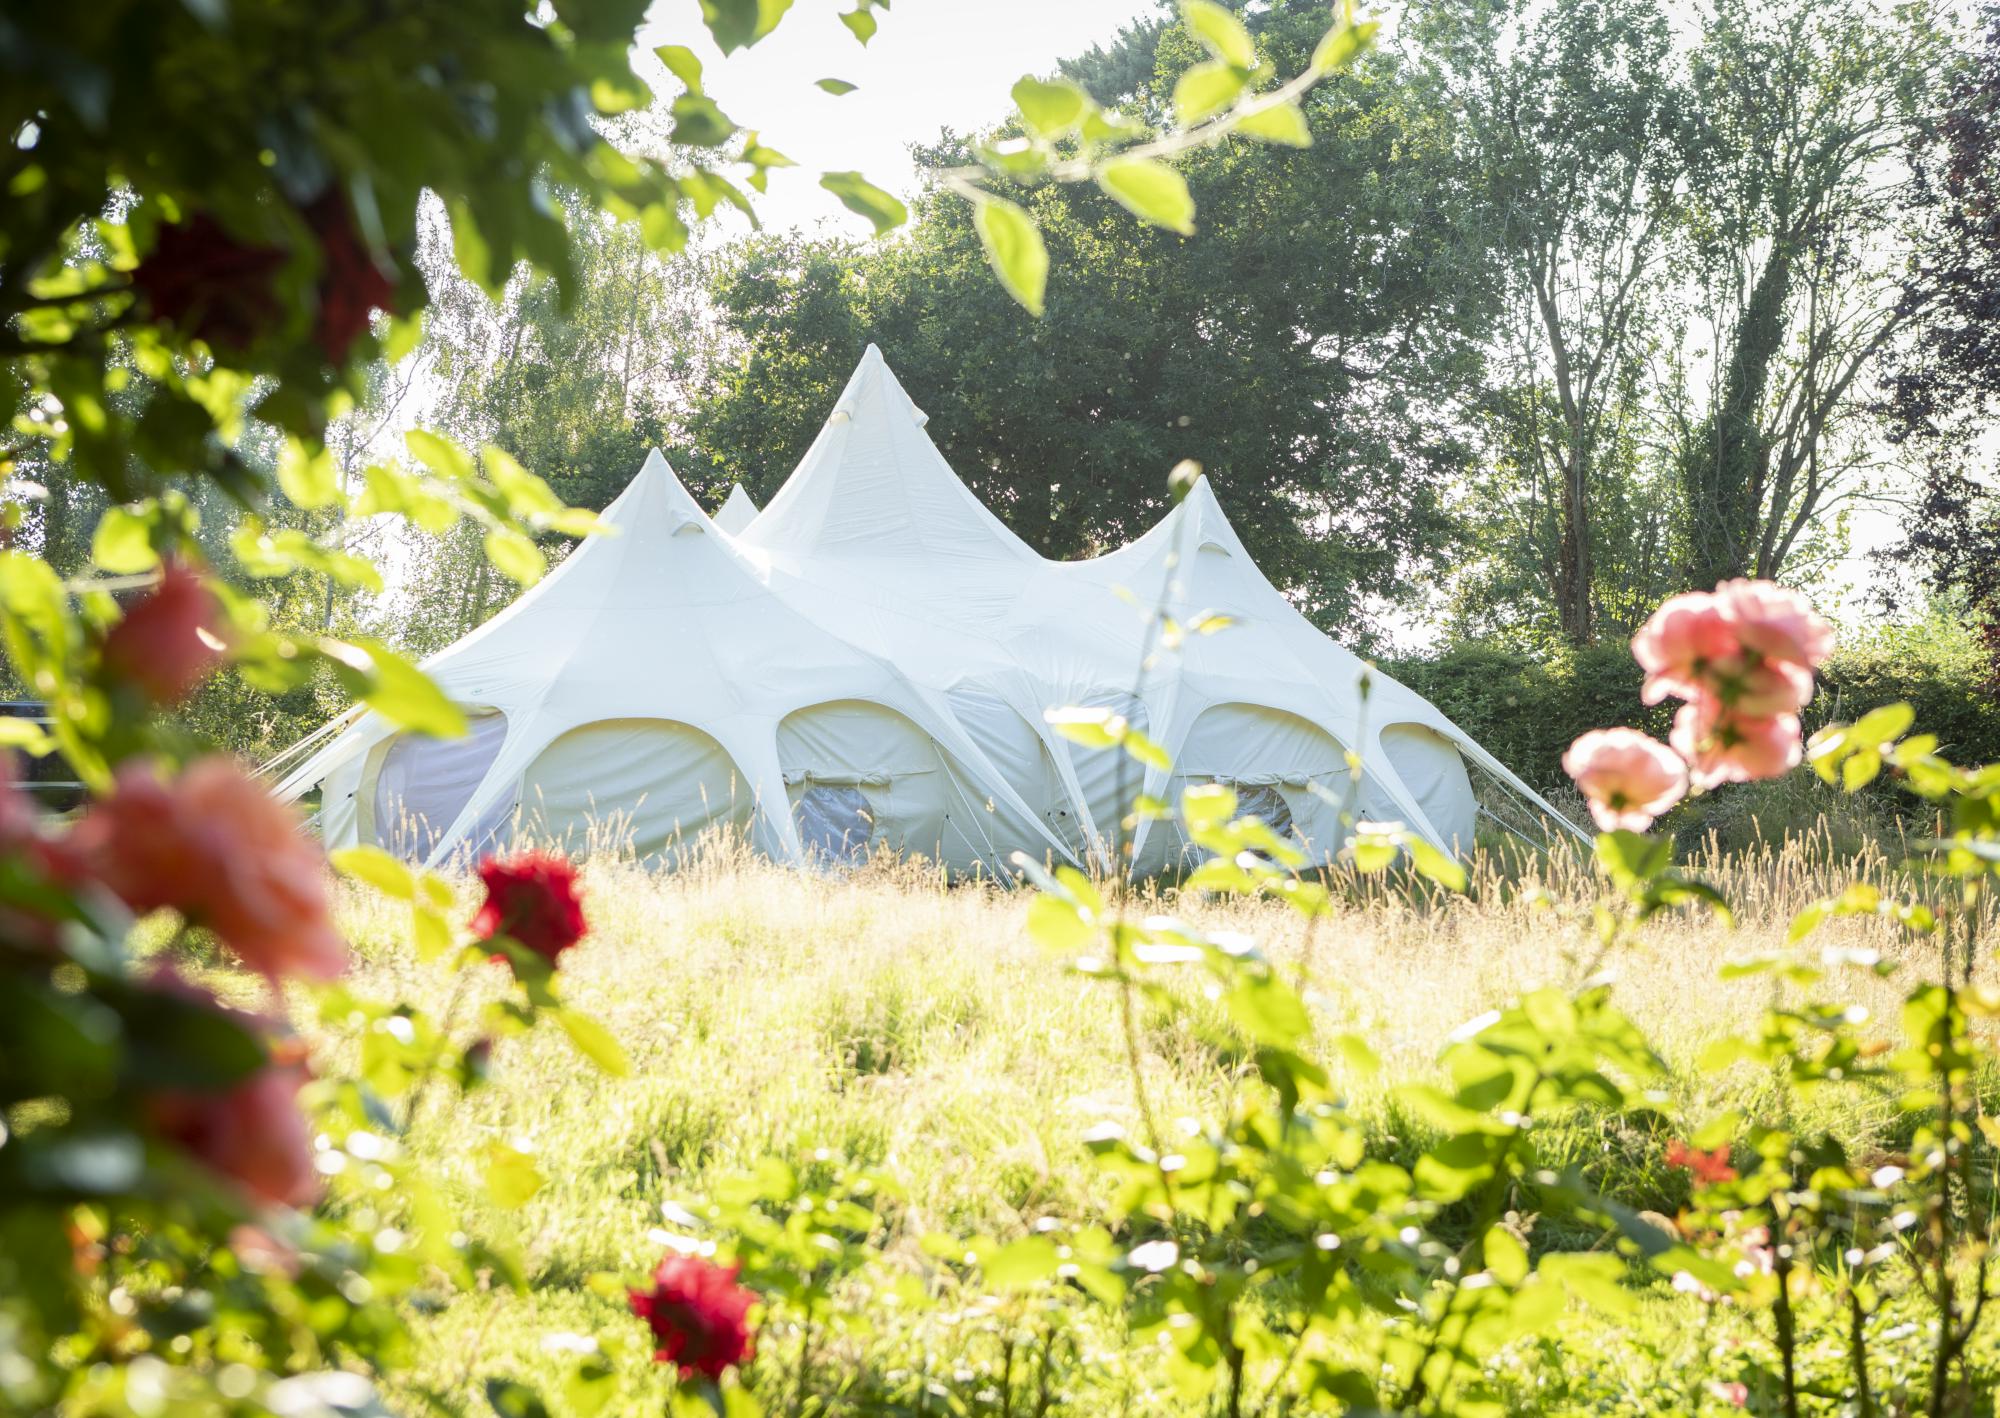 Glamping in West Midlands holidays at Cool Places